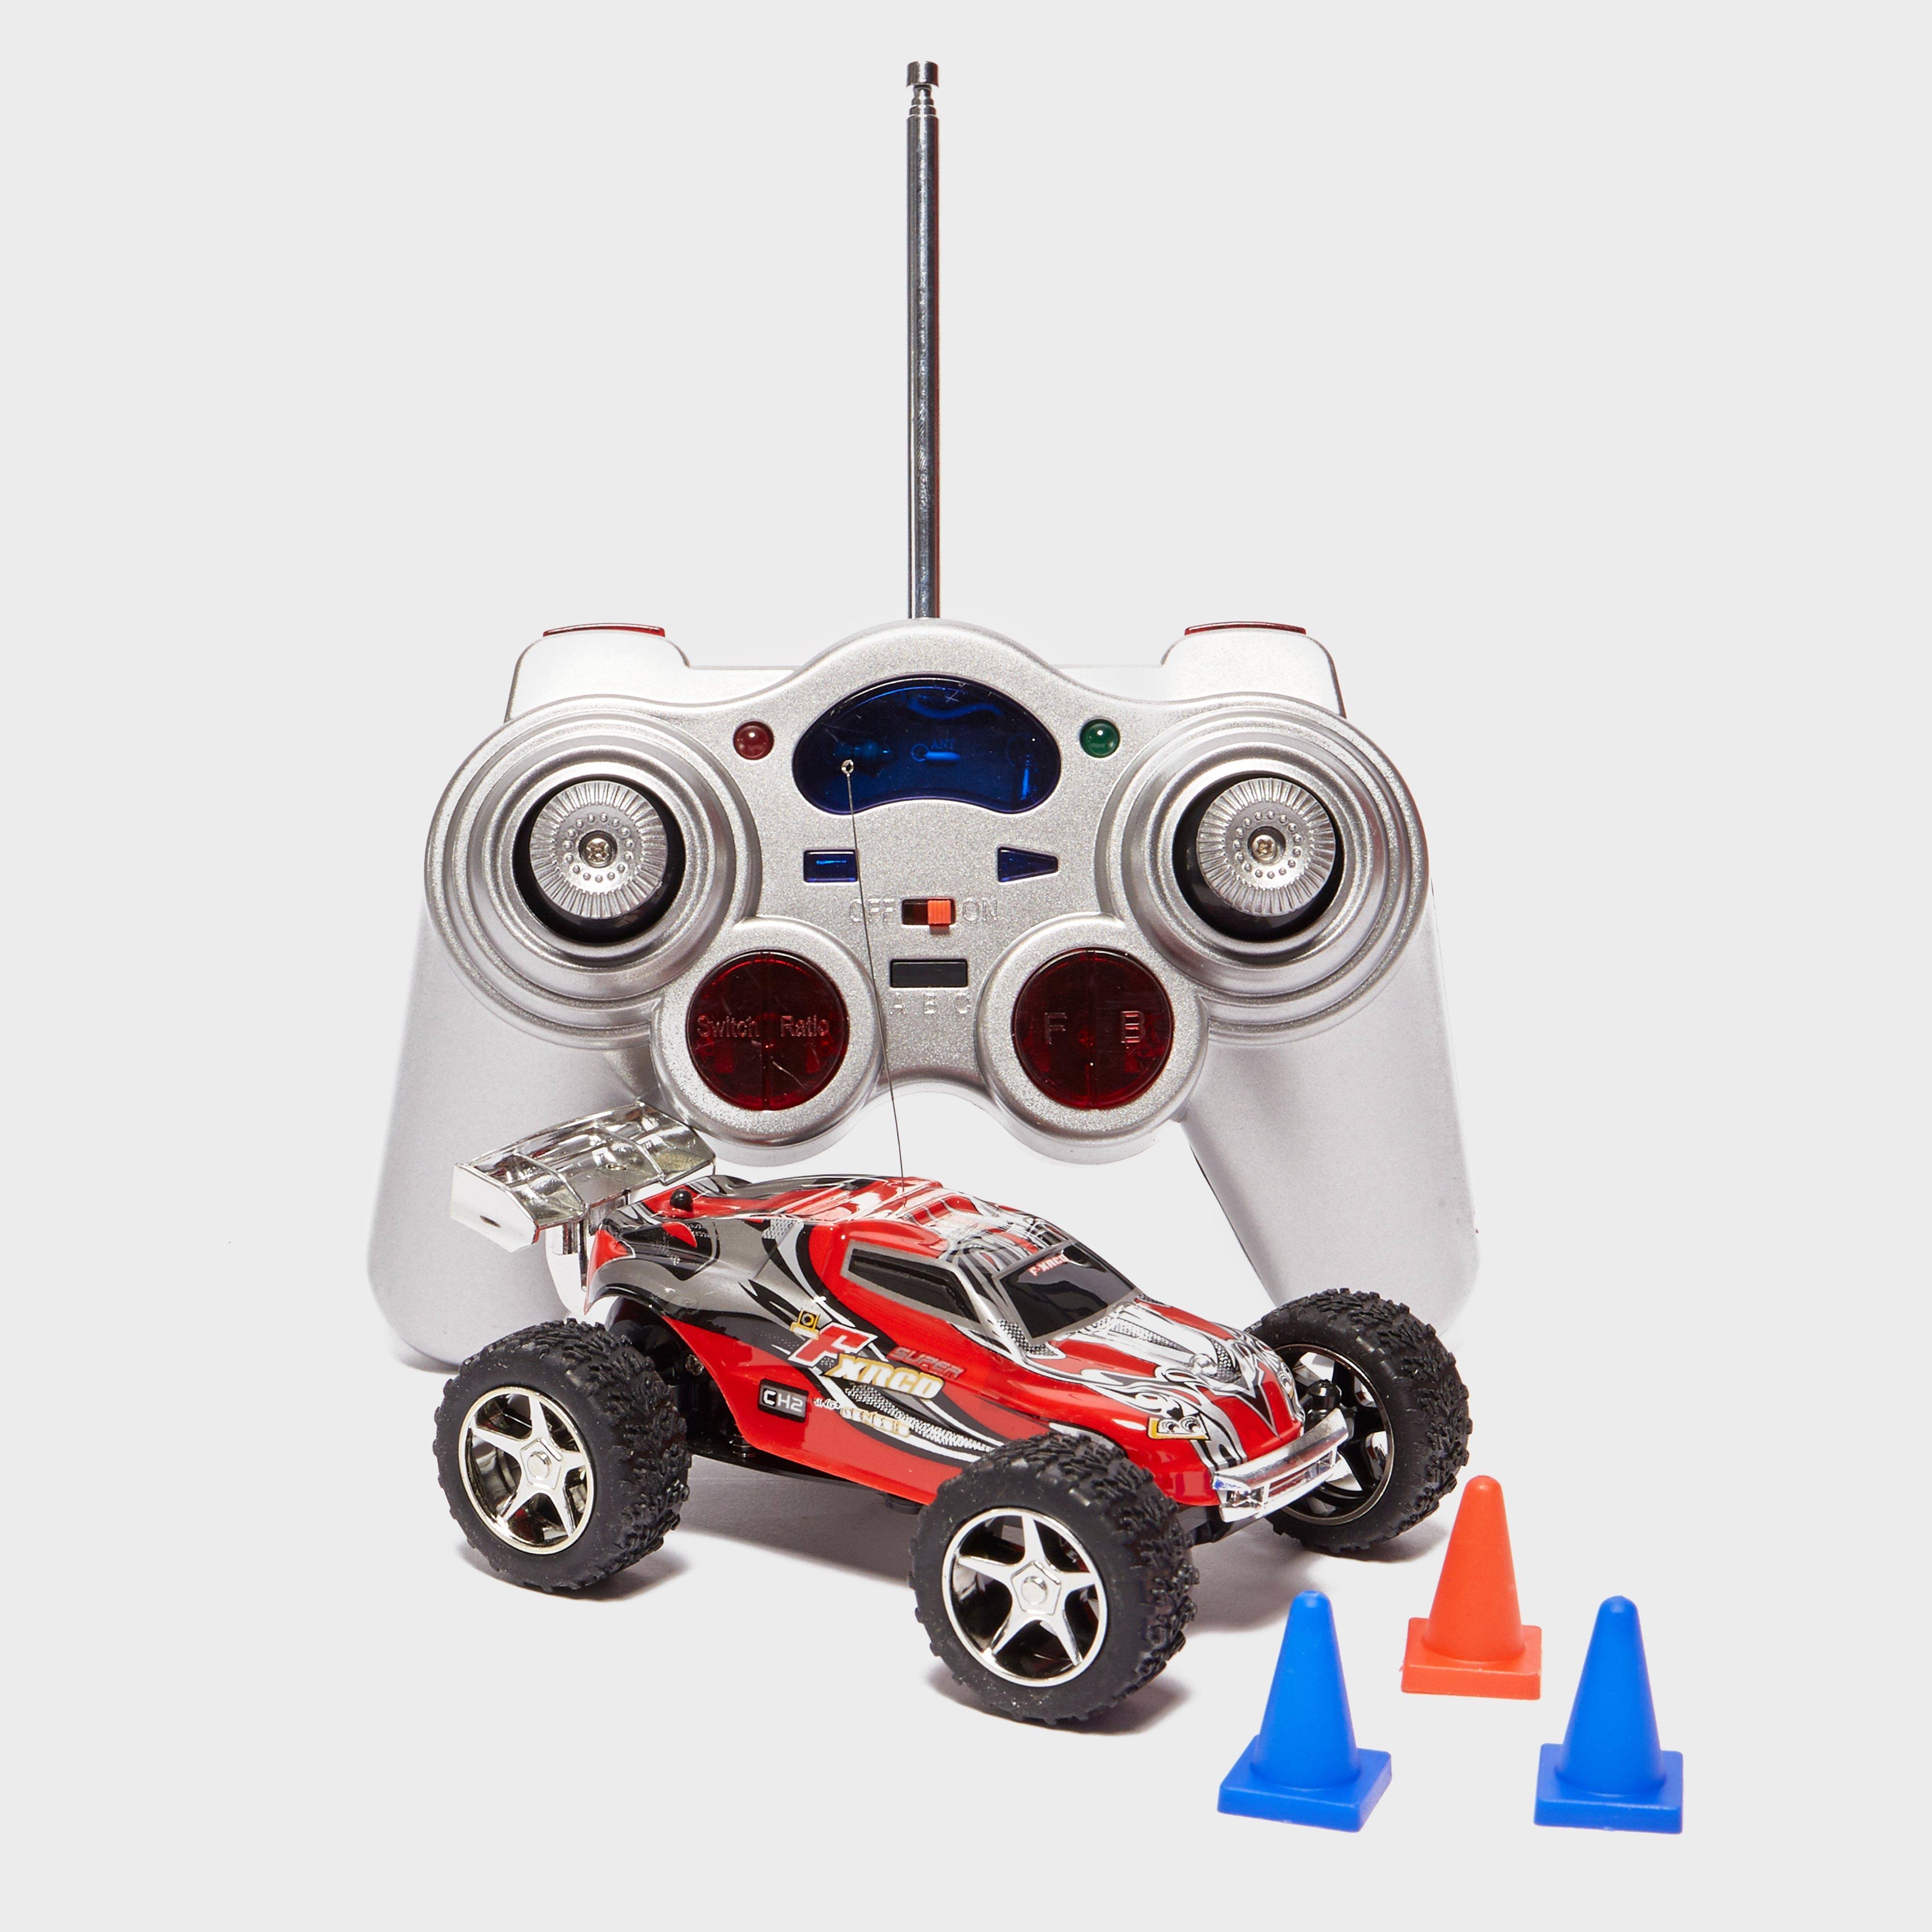 Invento High Speed RC Racing Car Remote Control - 18mph